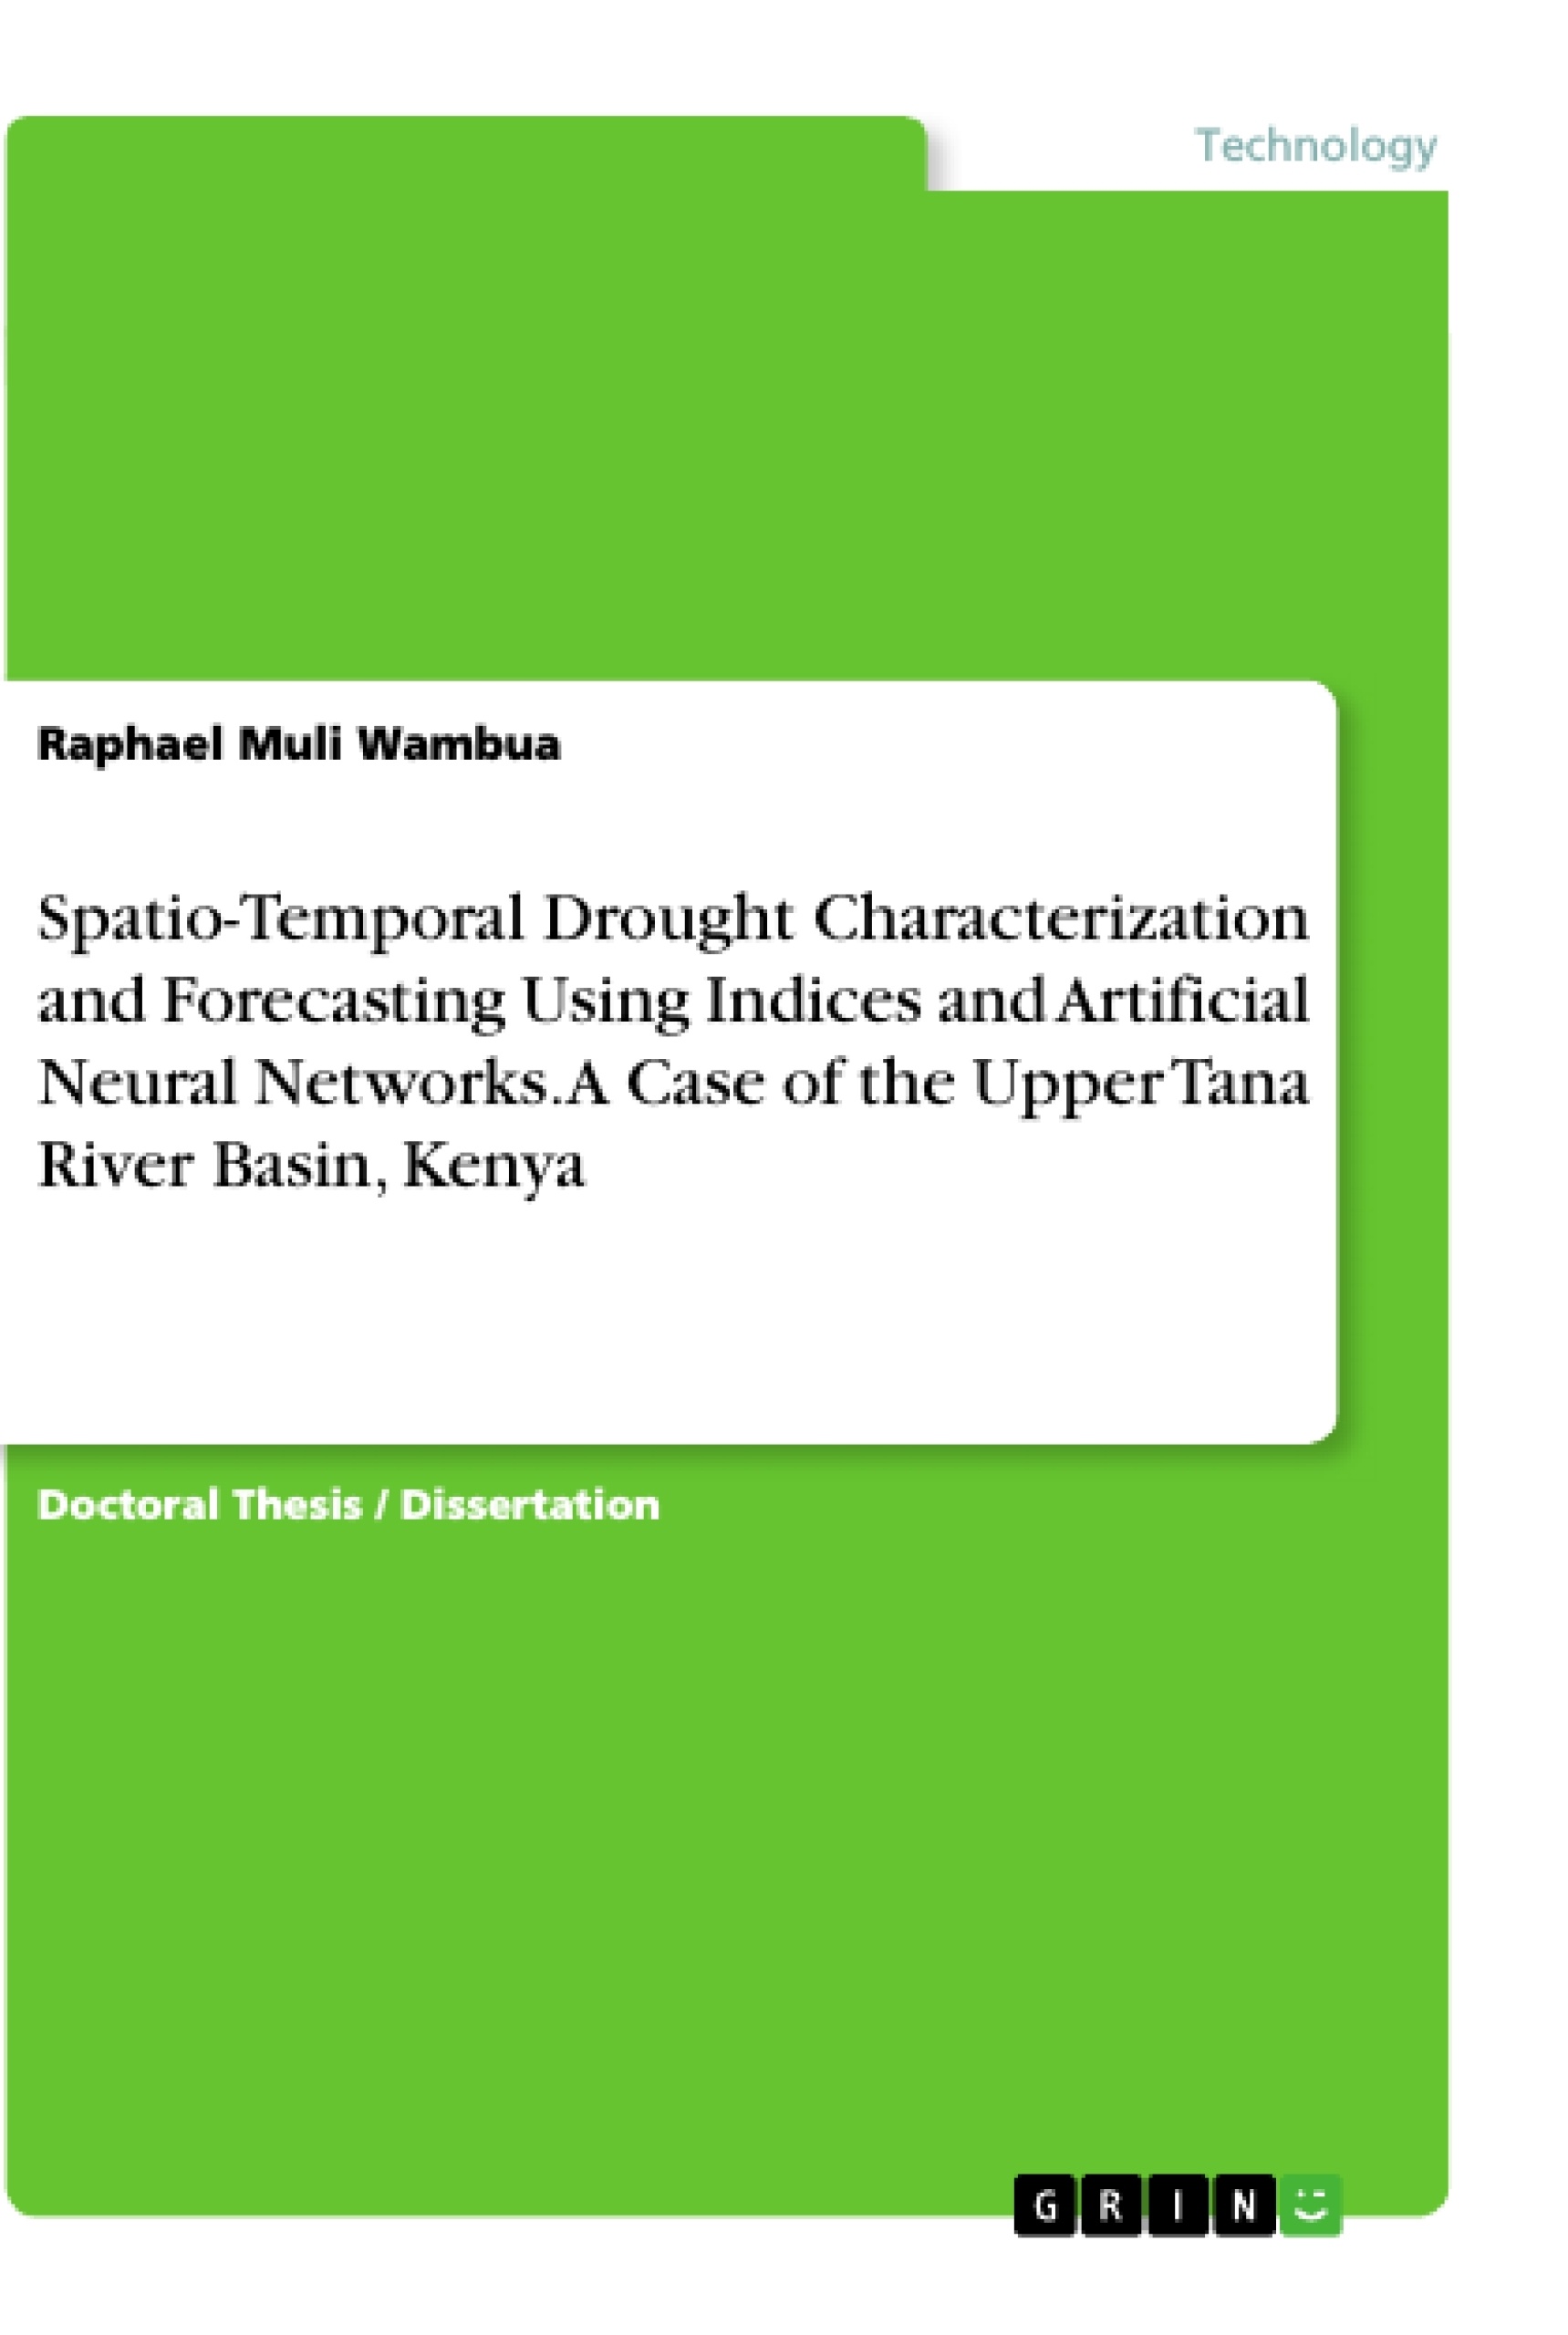 Titel: Spatio-Temporal Drought Characterization and Forecasting Using Indices and Artificial Neural Networks. A Case of the Upper Tana River Basin, Kenya